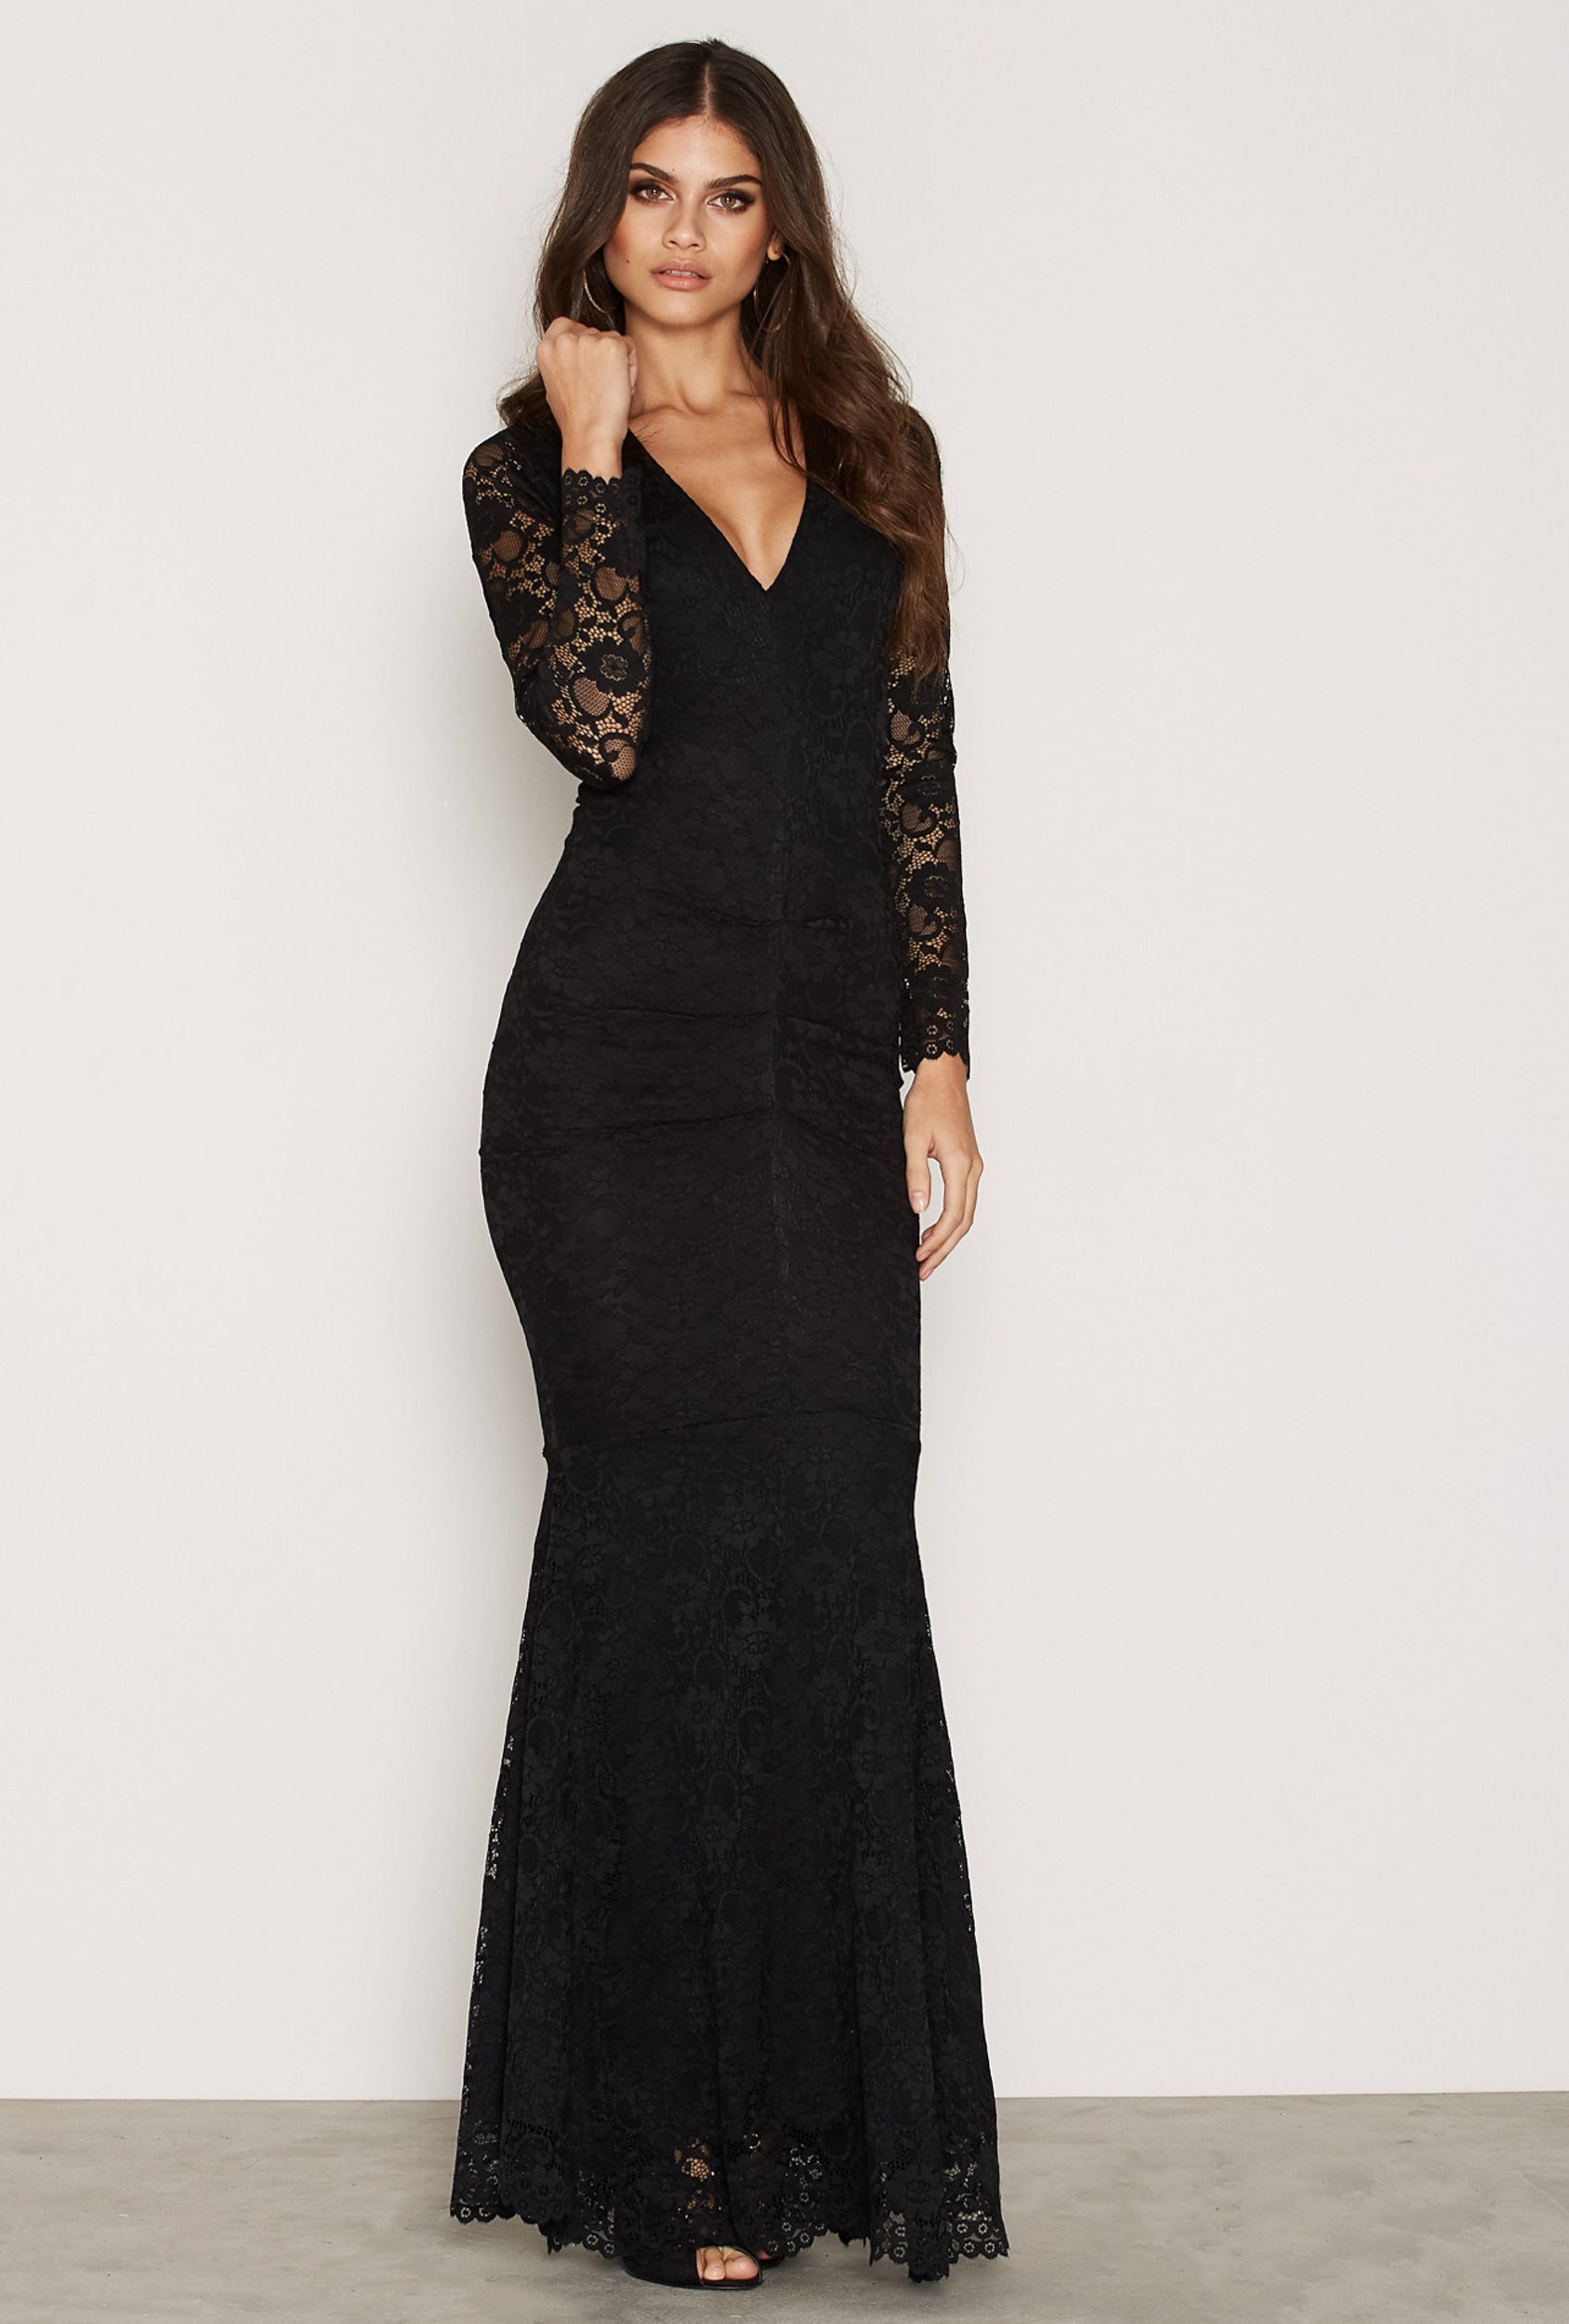 HONOR GOLD  SAVANNAH BLACK LACE WITH LONG SLEEVES FISHTAIL MAXI DRESS –  Honor Gold